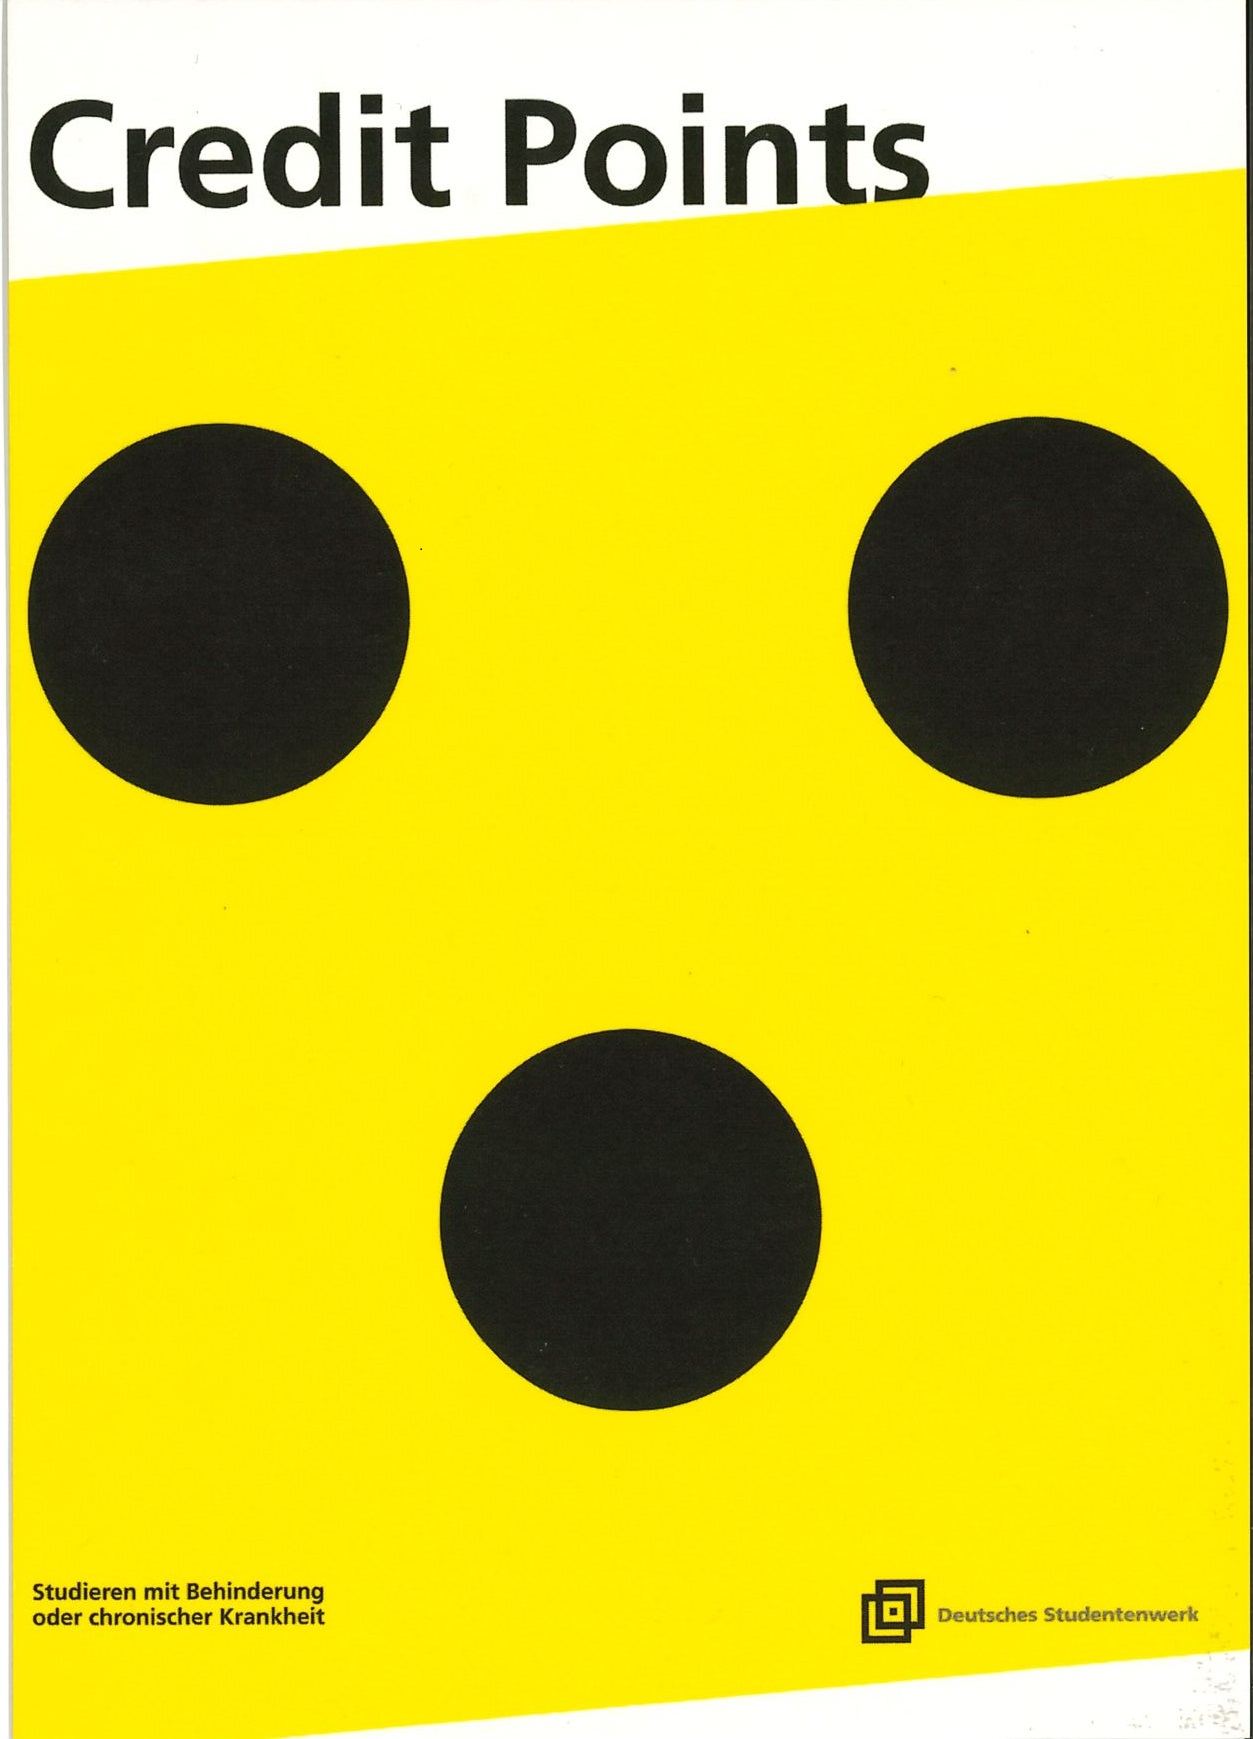 a yellow and black dot